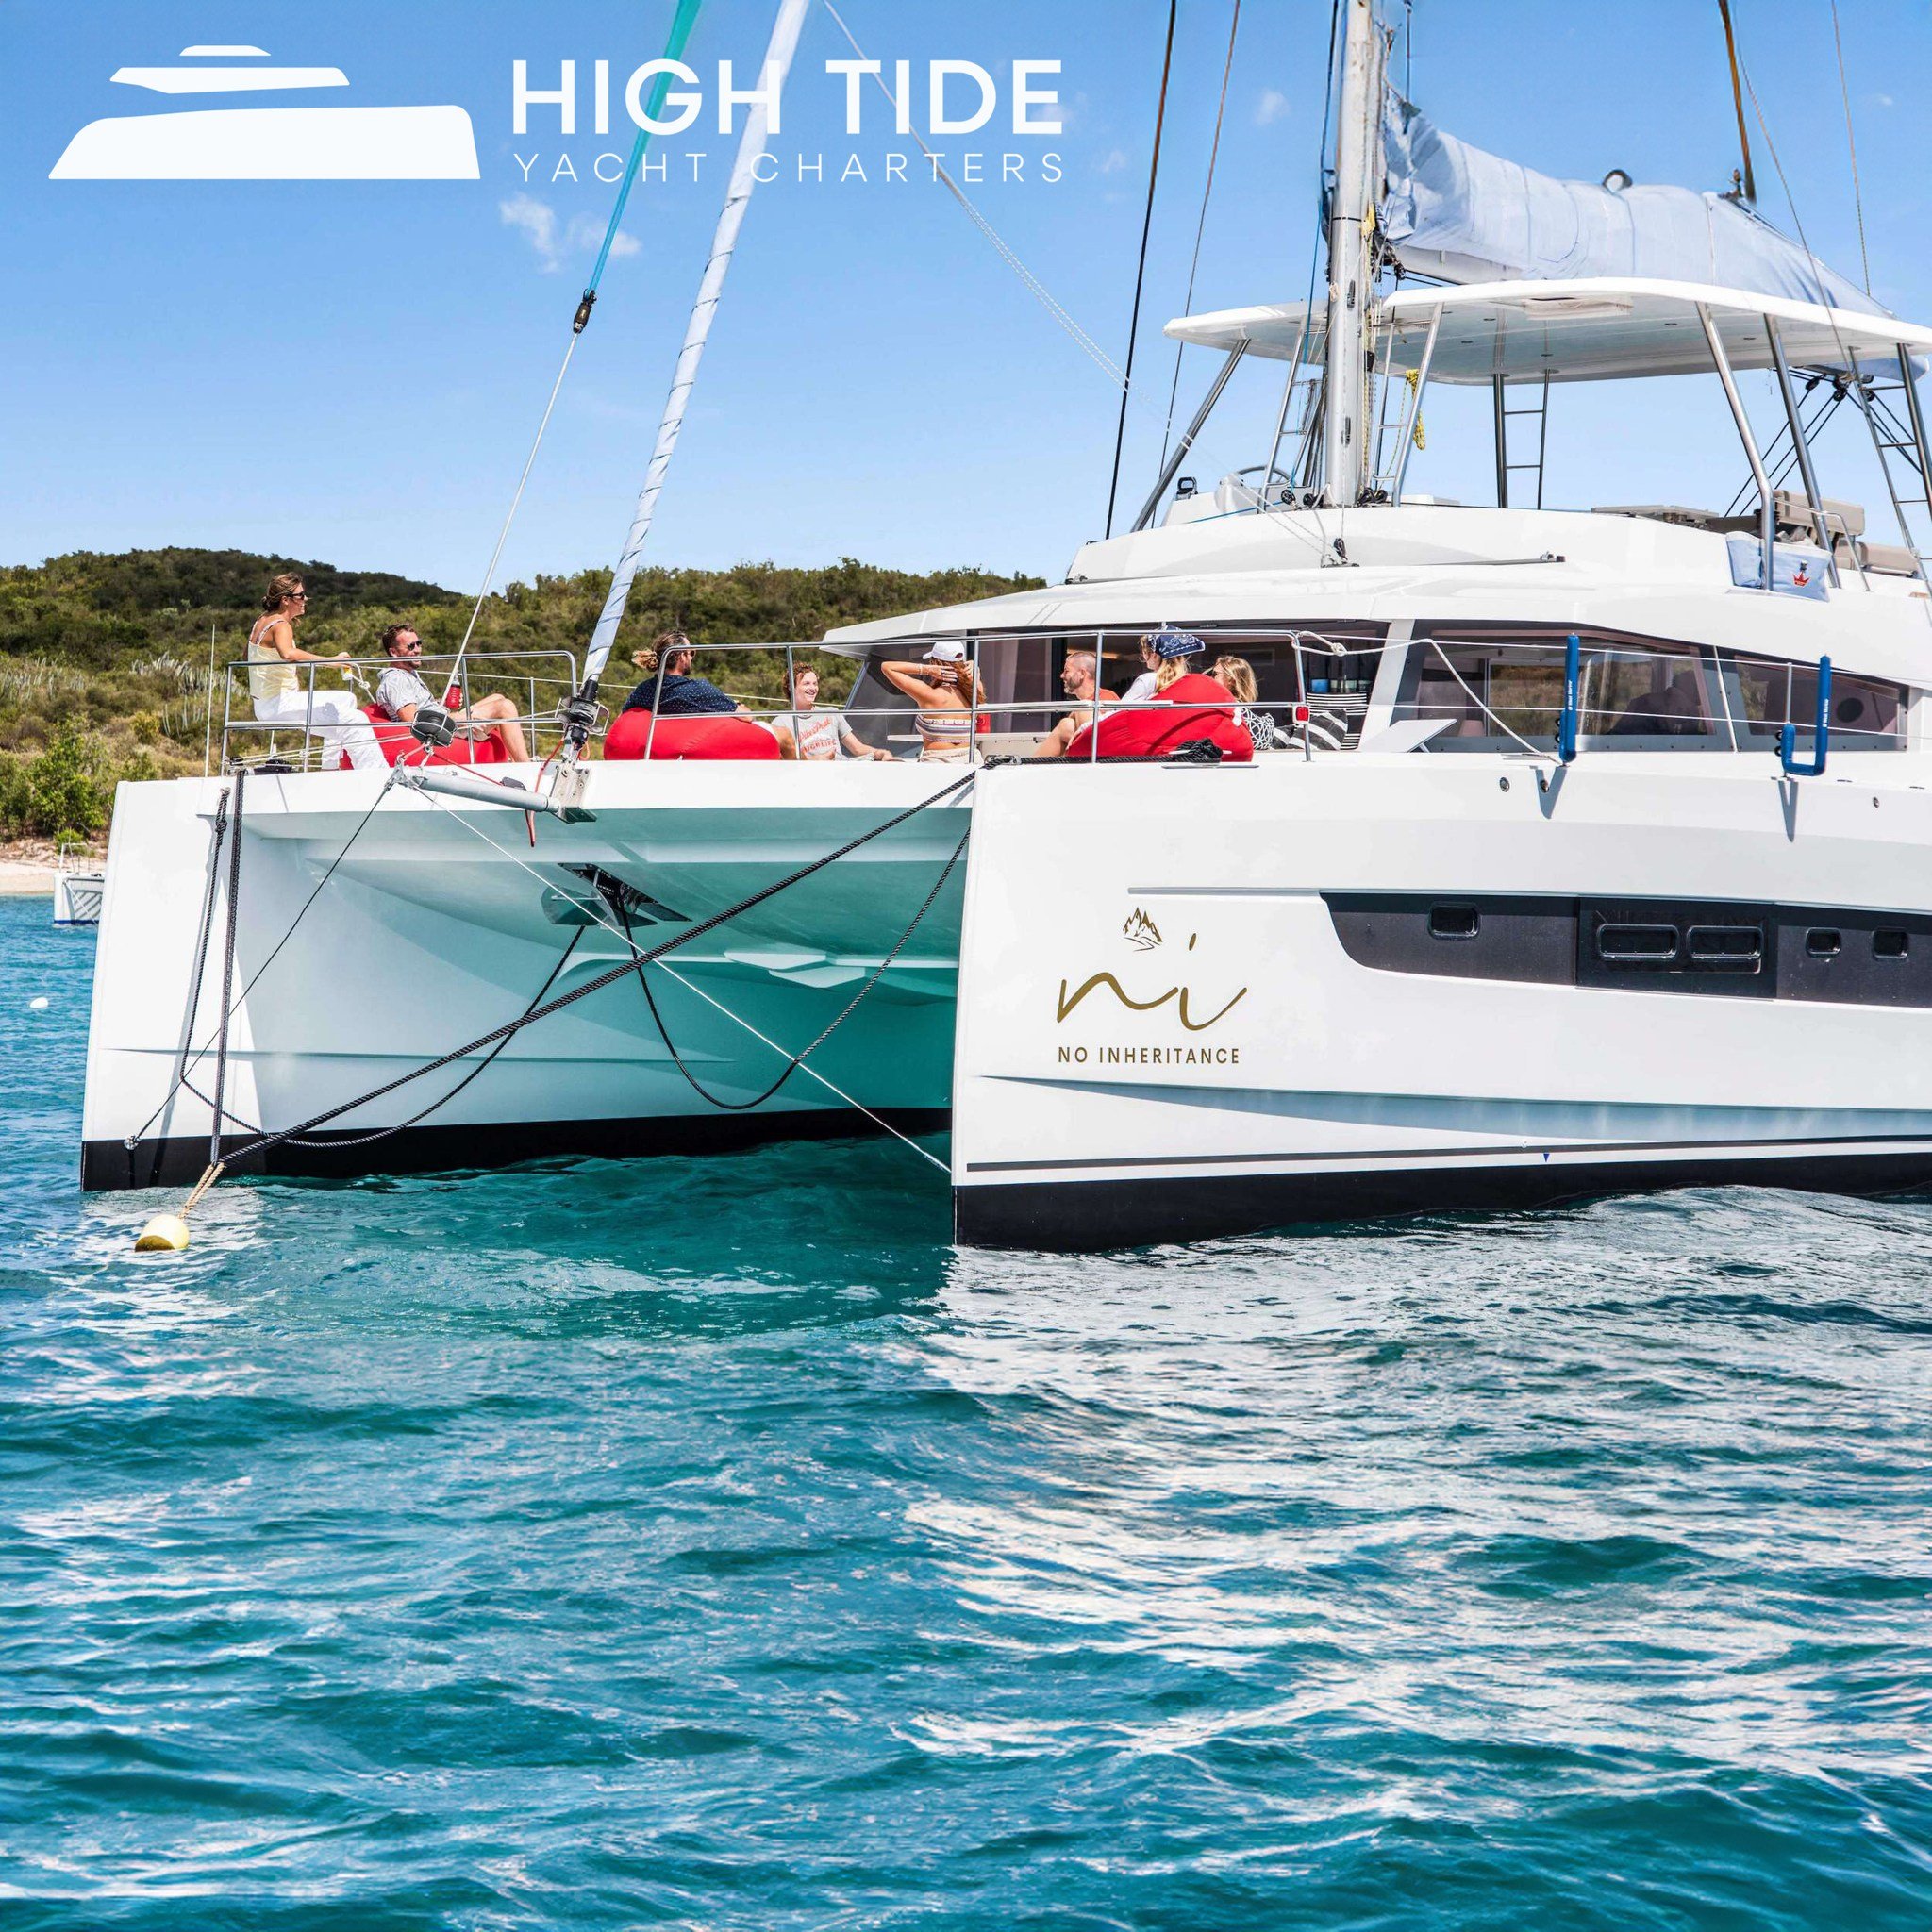 Escape to paradise aboard NO INHERITENCE, your luxurious 2023 Bali 5.4 Catamaran! Accommodating 10 guests in 4 Queen cabins and 1 twin cabin, set sail from the stunning Virgin Islands with pick-up available from St. Thomas, USVI or Tortola, BVI.

Div